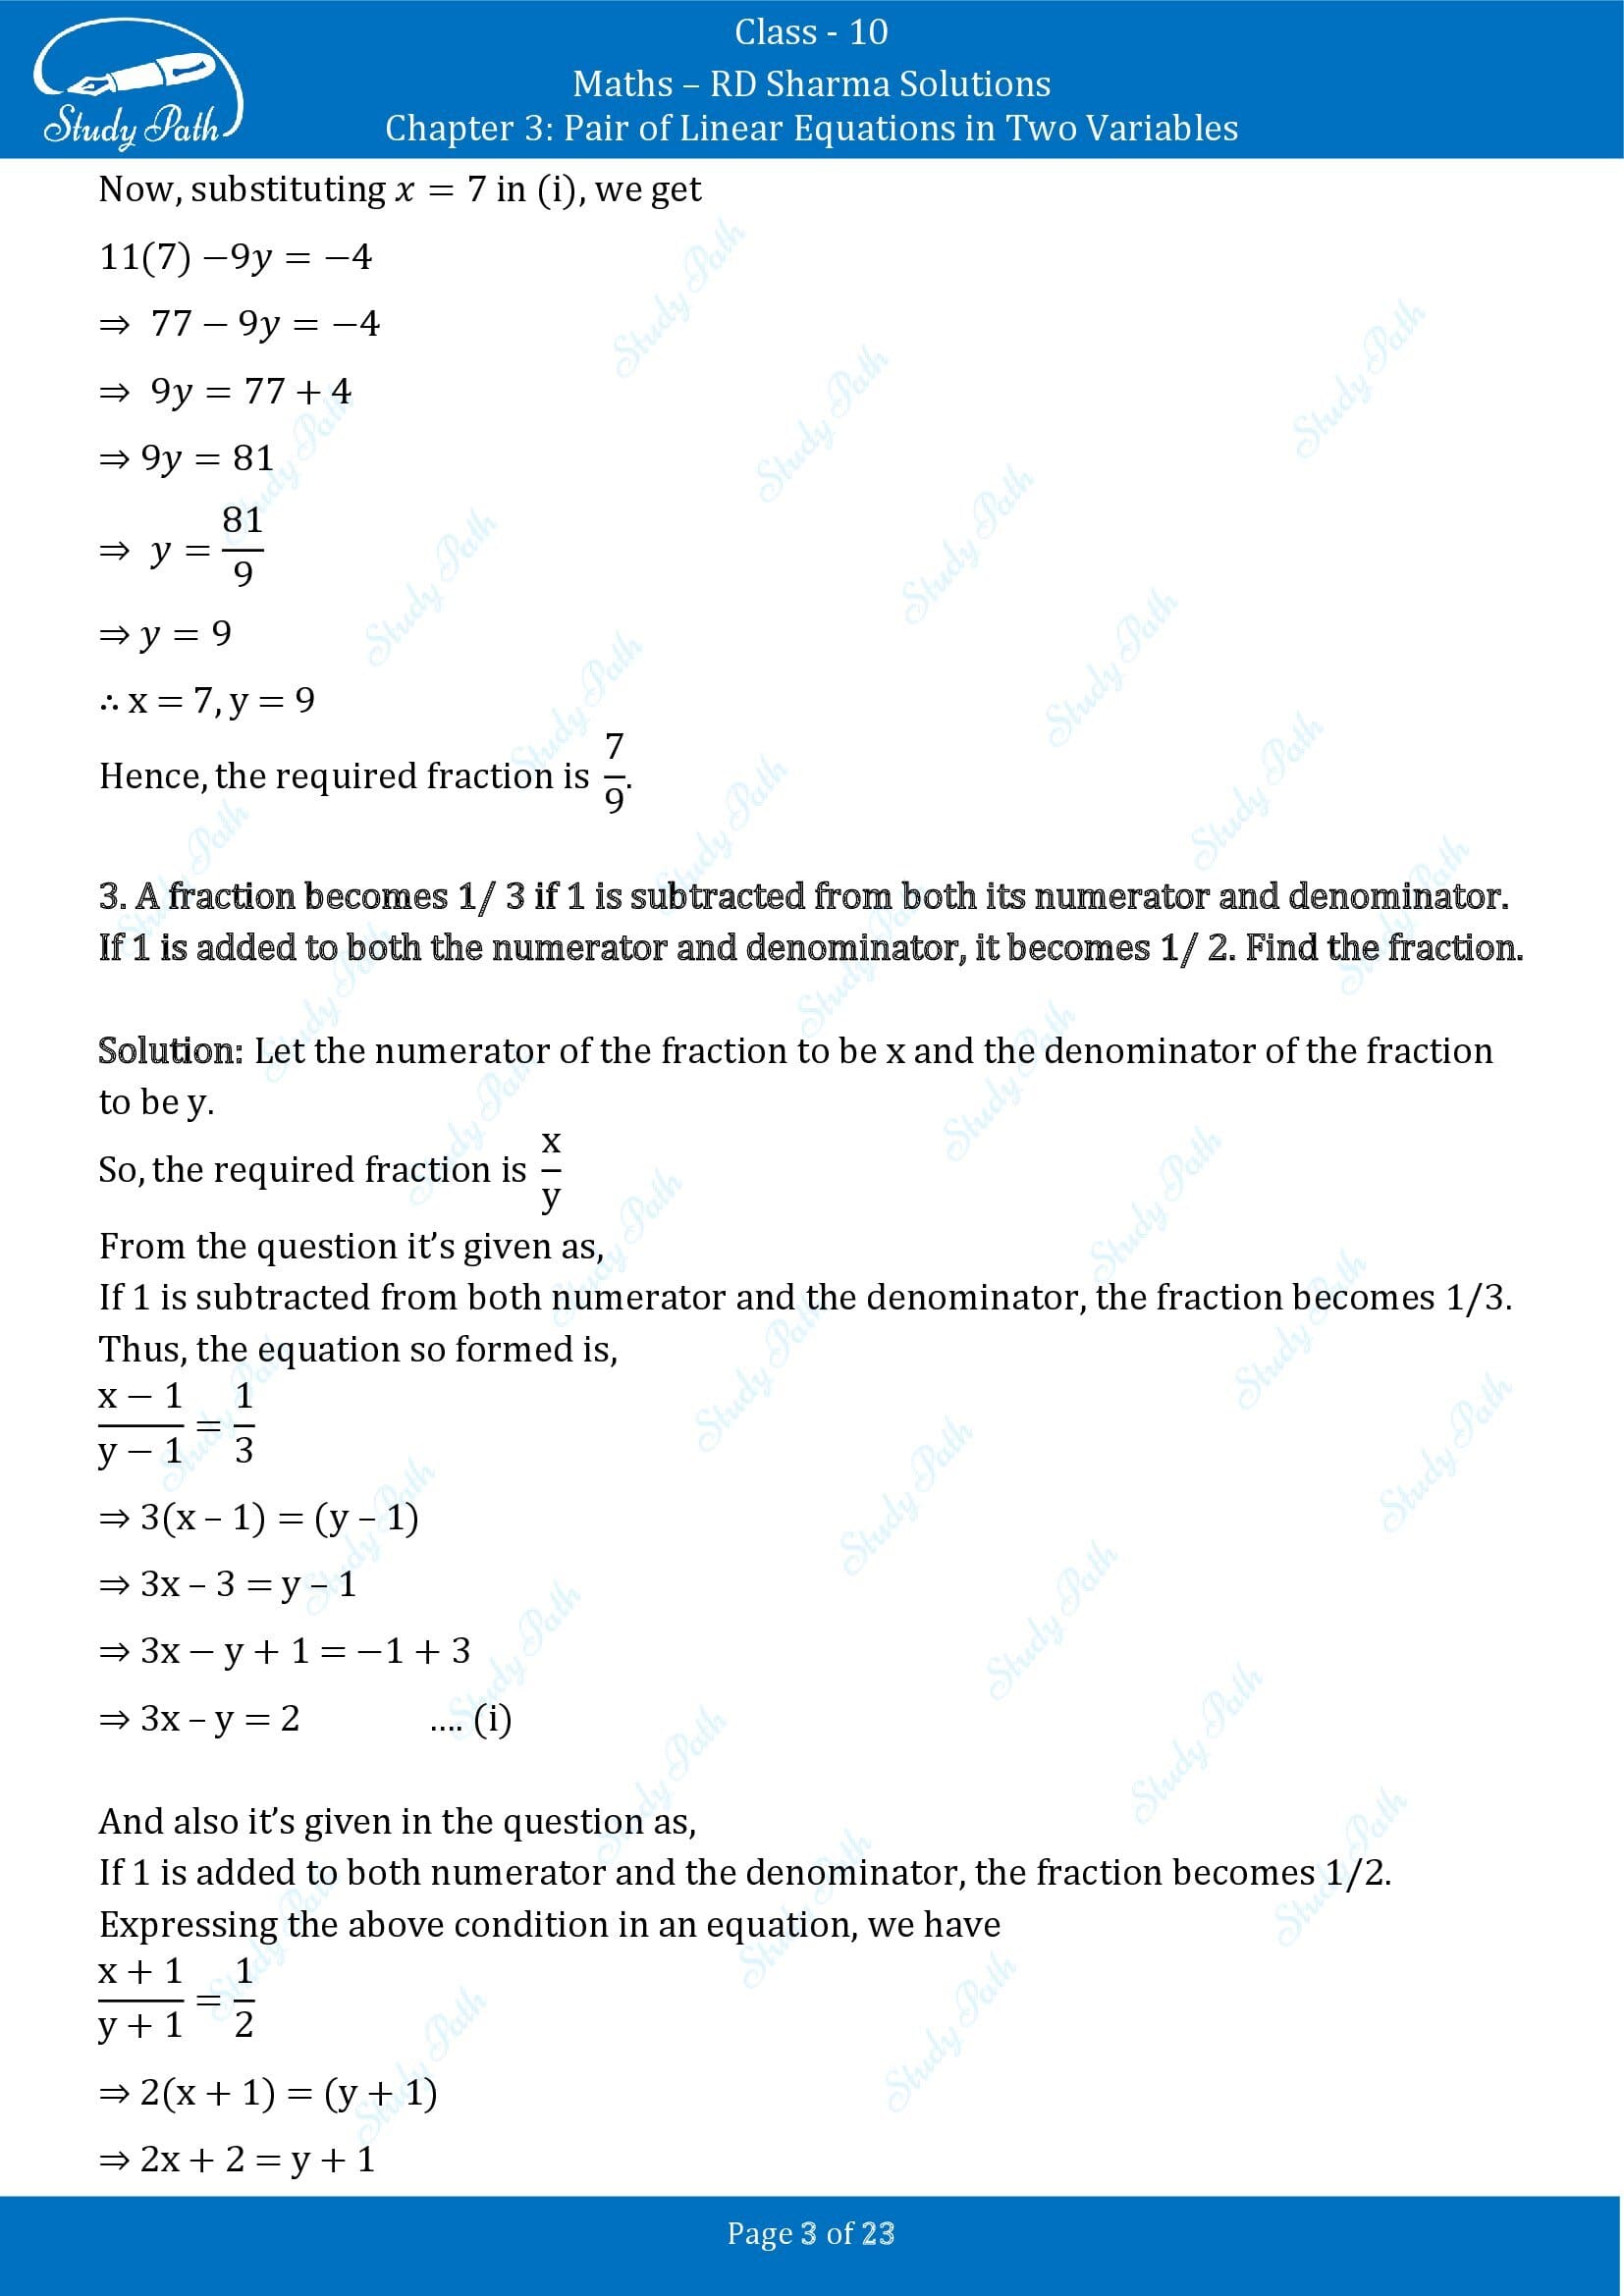 RD Sharma Solutions Class 10 Chapter 3 Pair of Linear Equations in Two Variables Exercise 3.8 00003